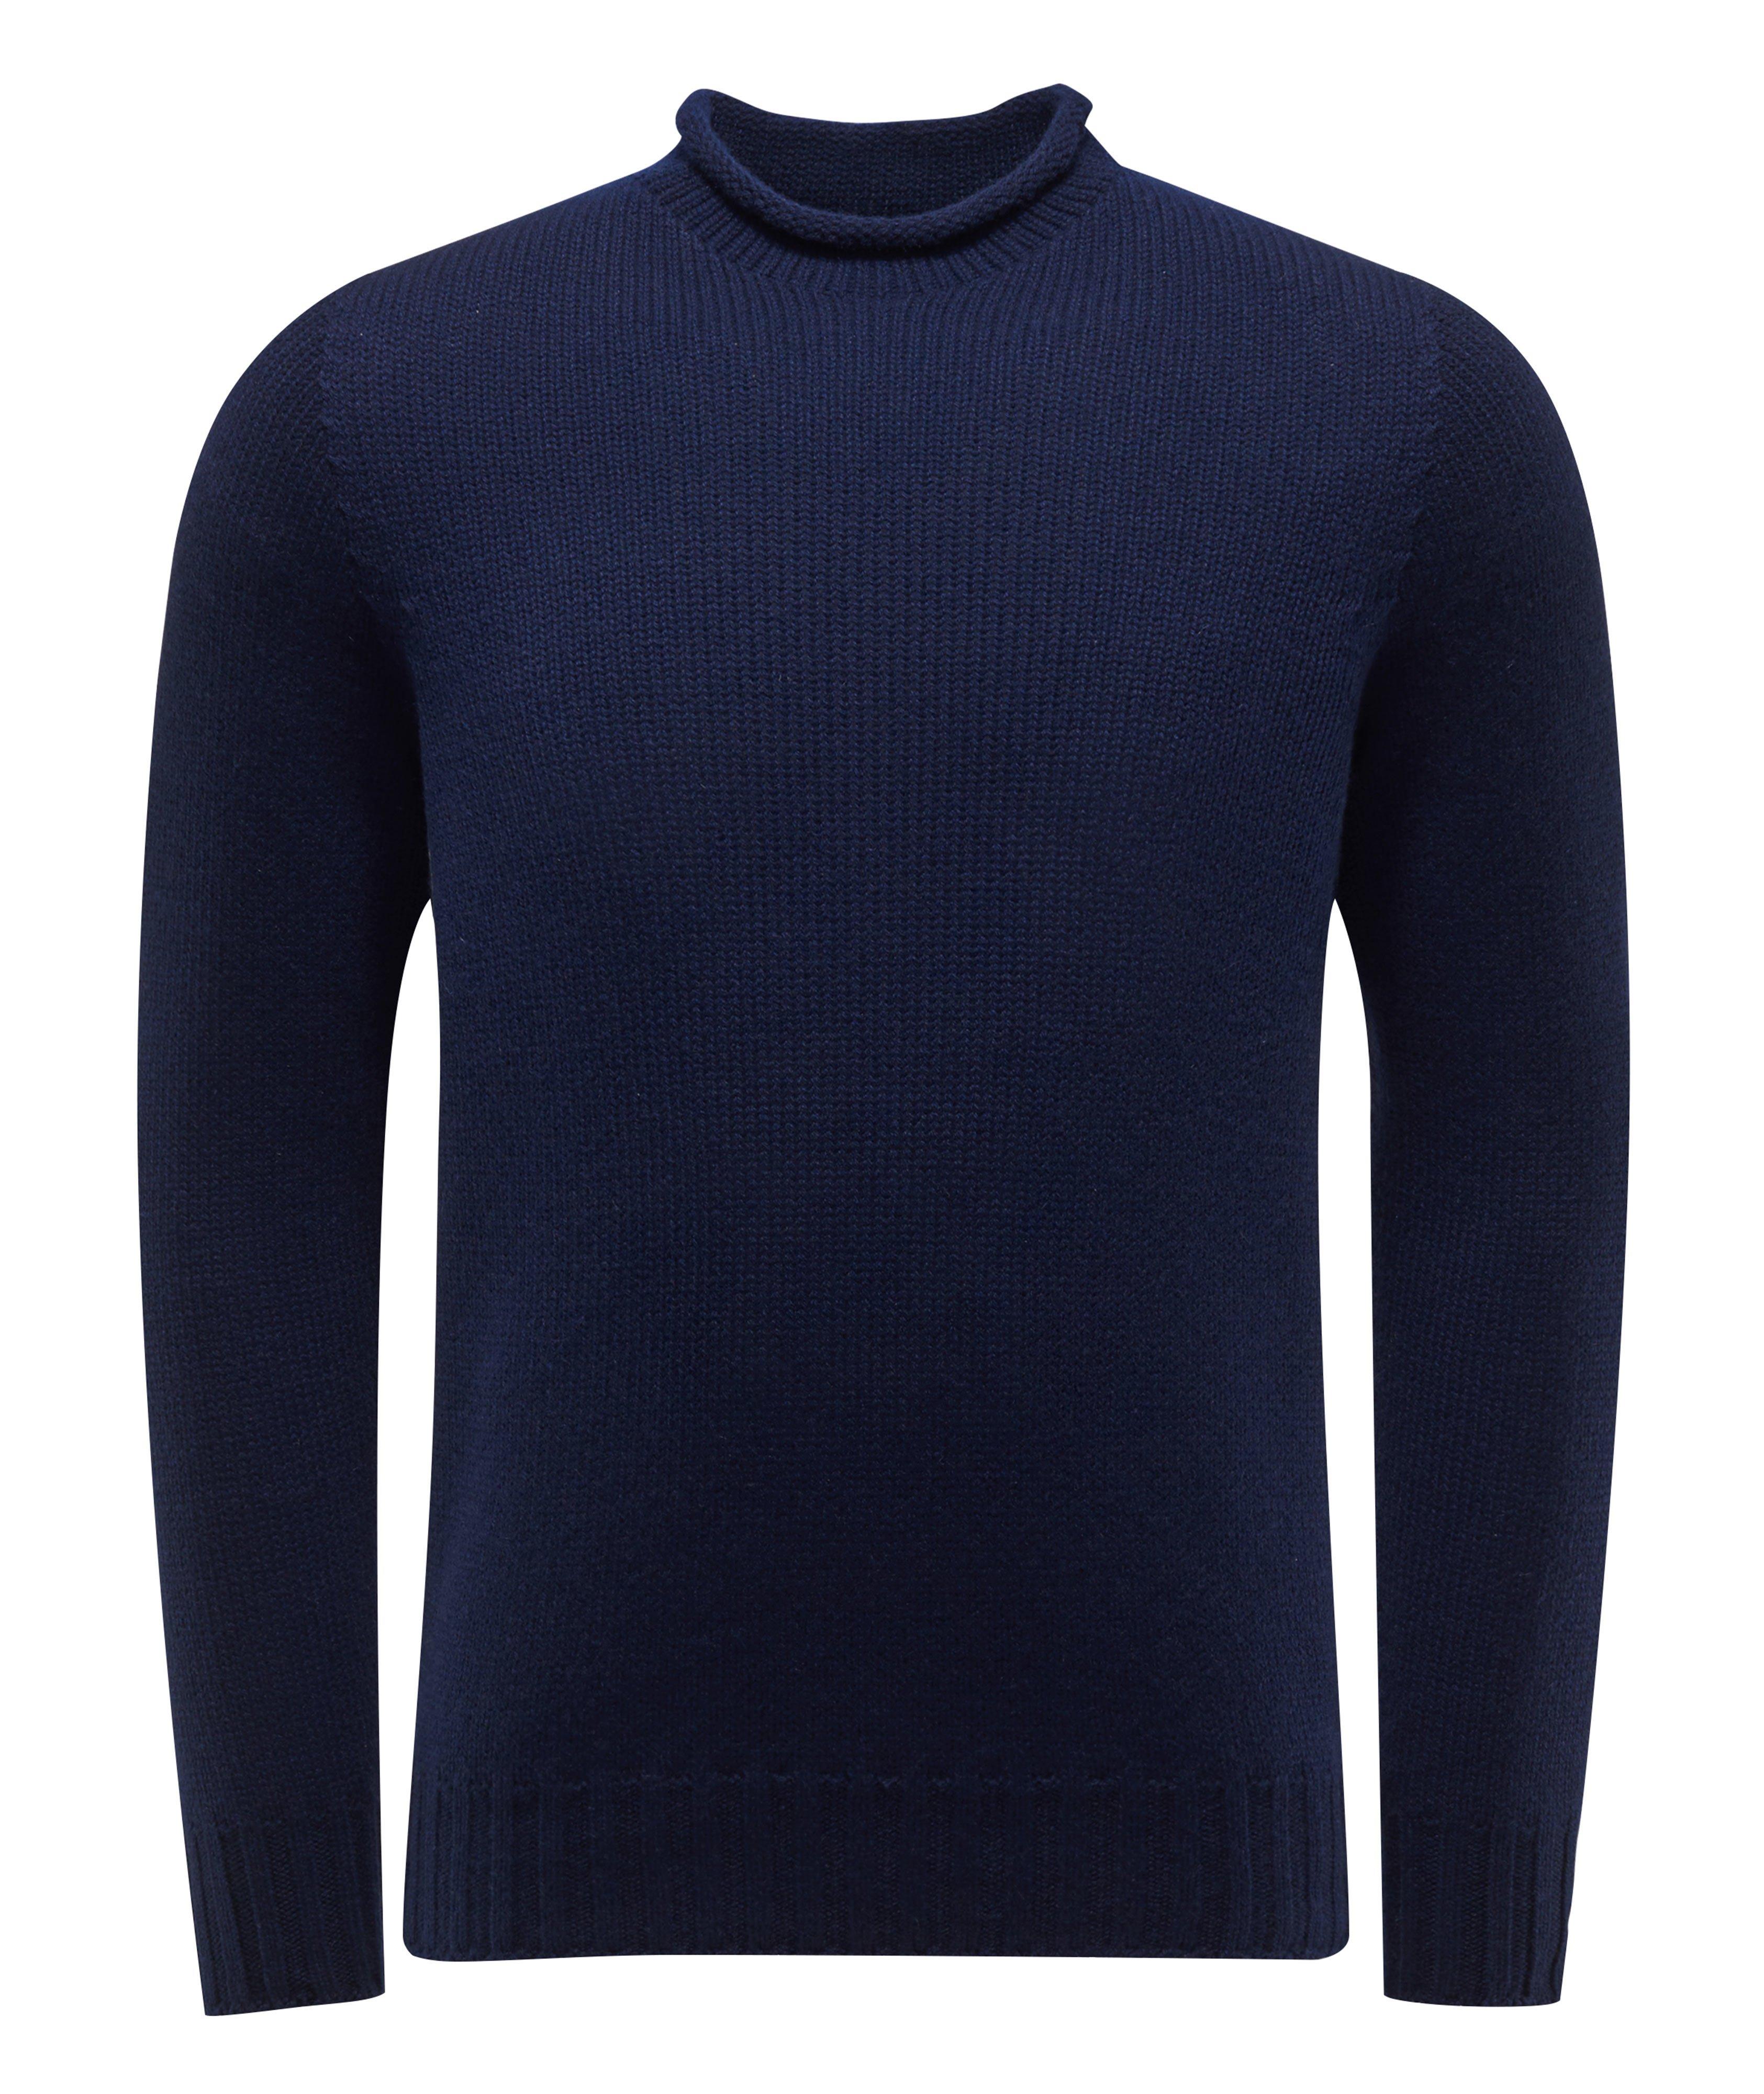 Knitted Roll-Neck Sweater image 0